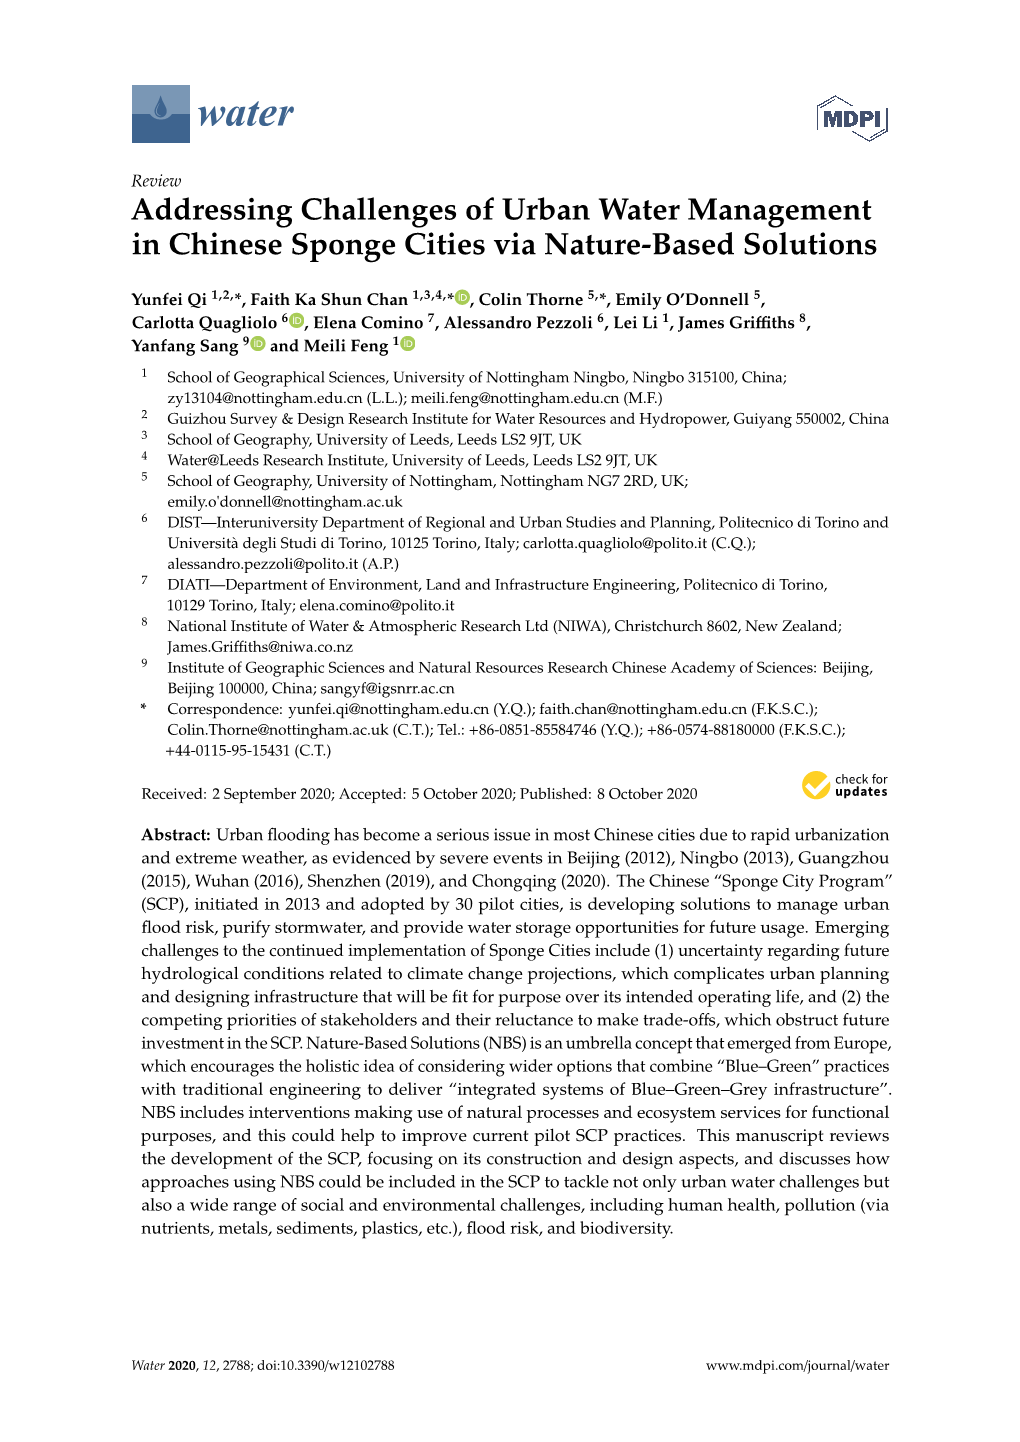 Addressing Challenges of Urban Water Management in Chinese Sponge Cities Via Nature-Based Solutions